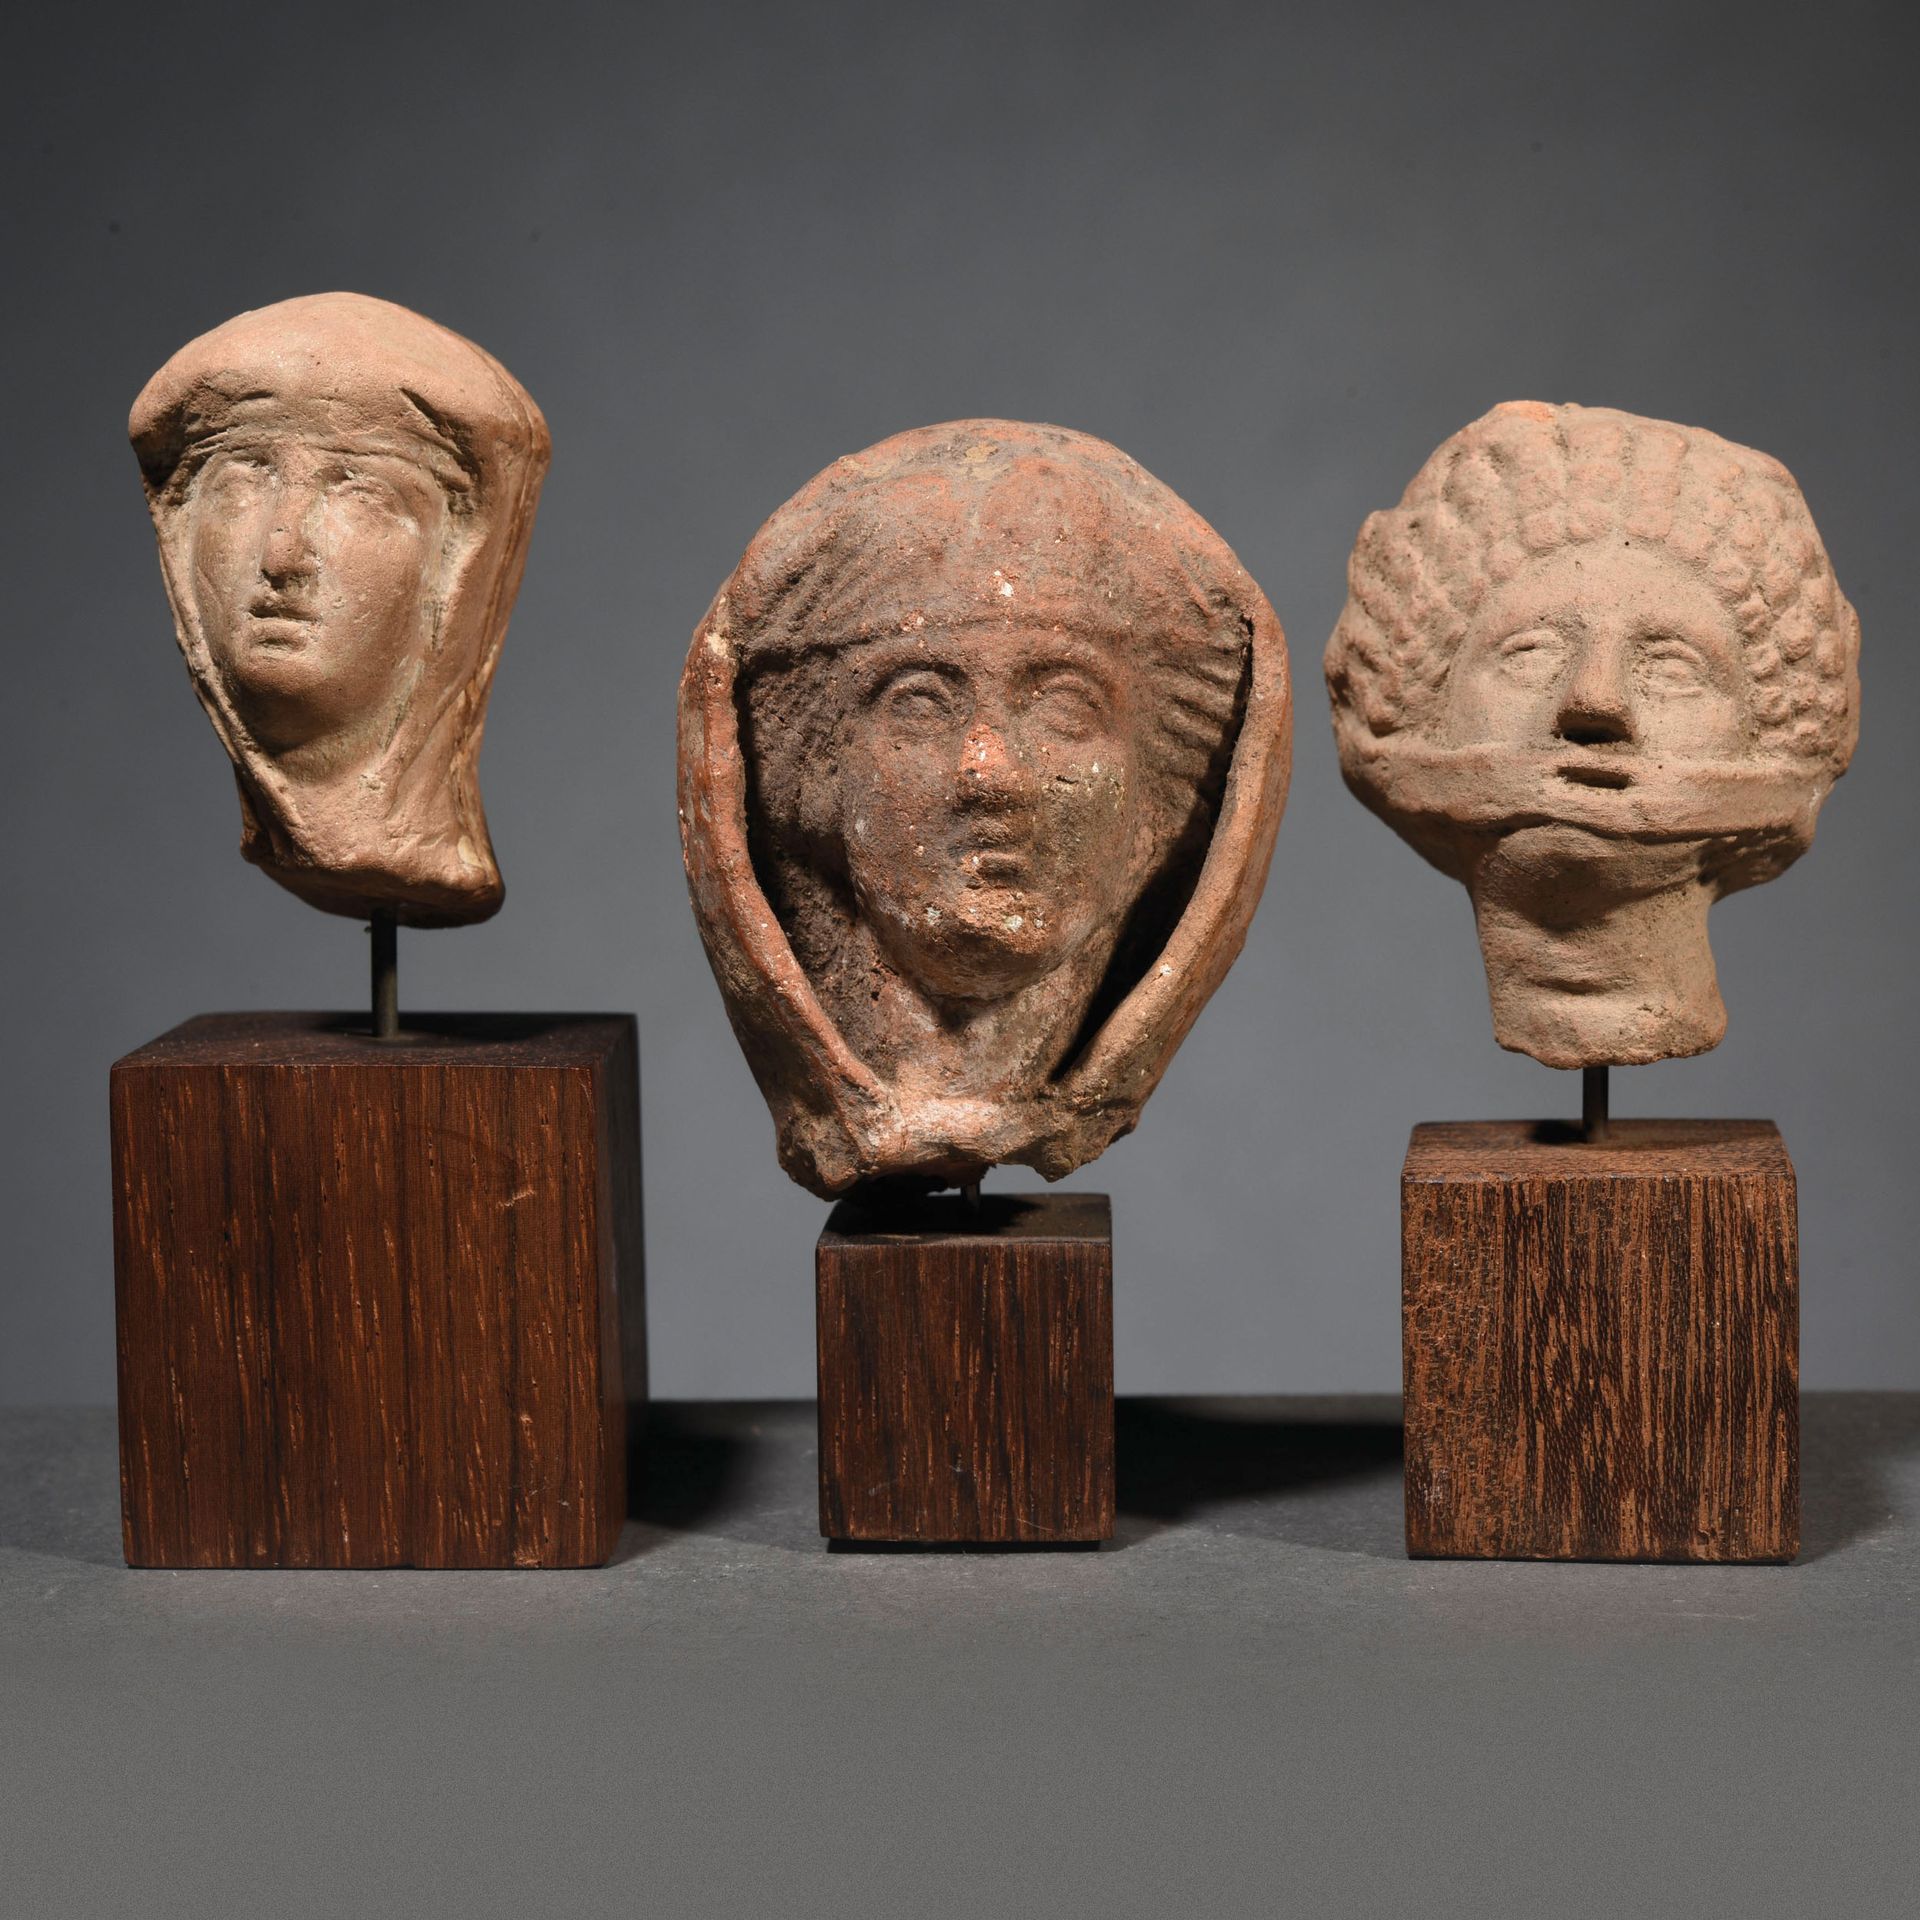 Null LOT OF 3 VEILED HEADS

Hellenistic art

In terracotta 



Provenance

Forme&hellip;